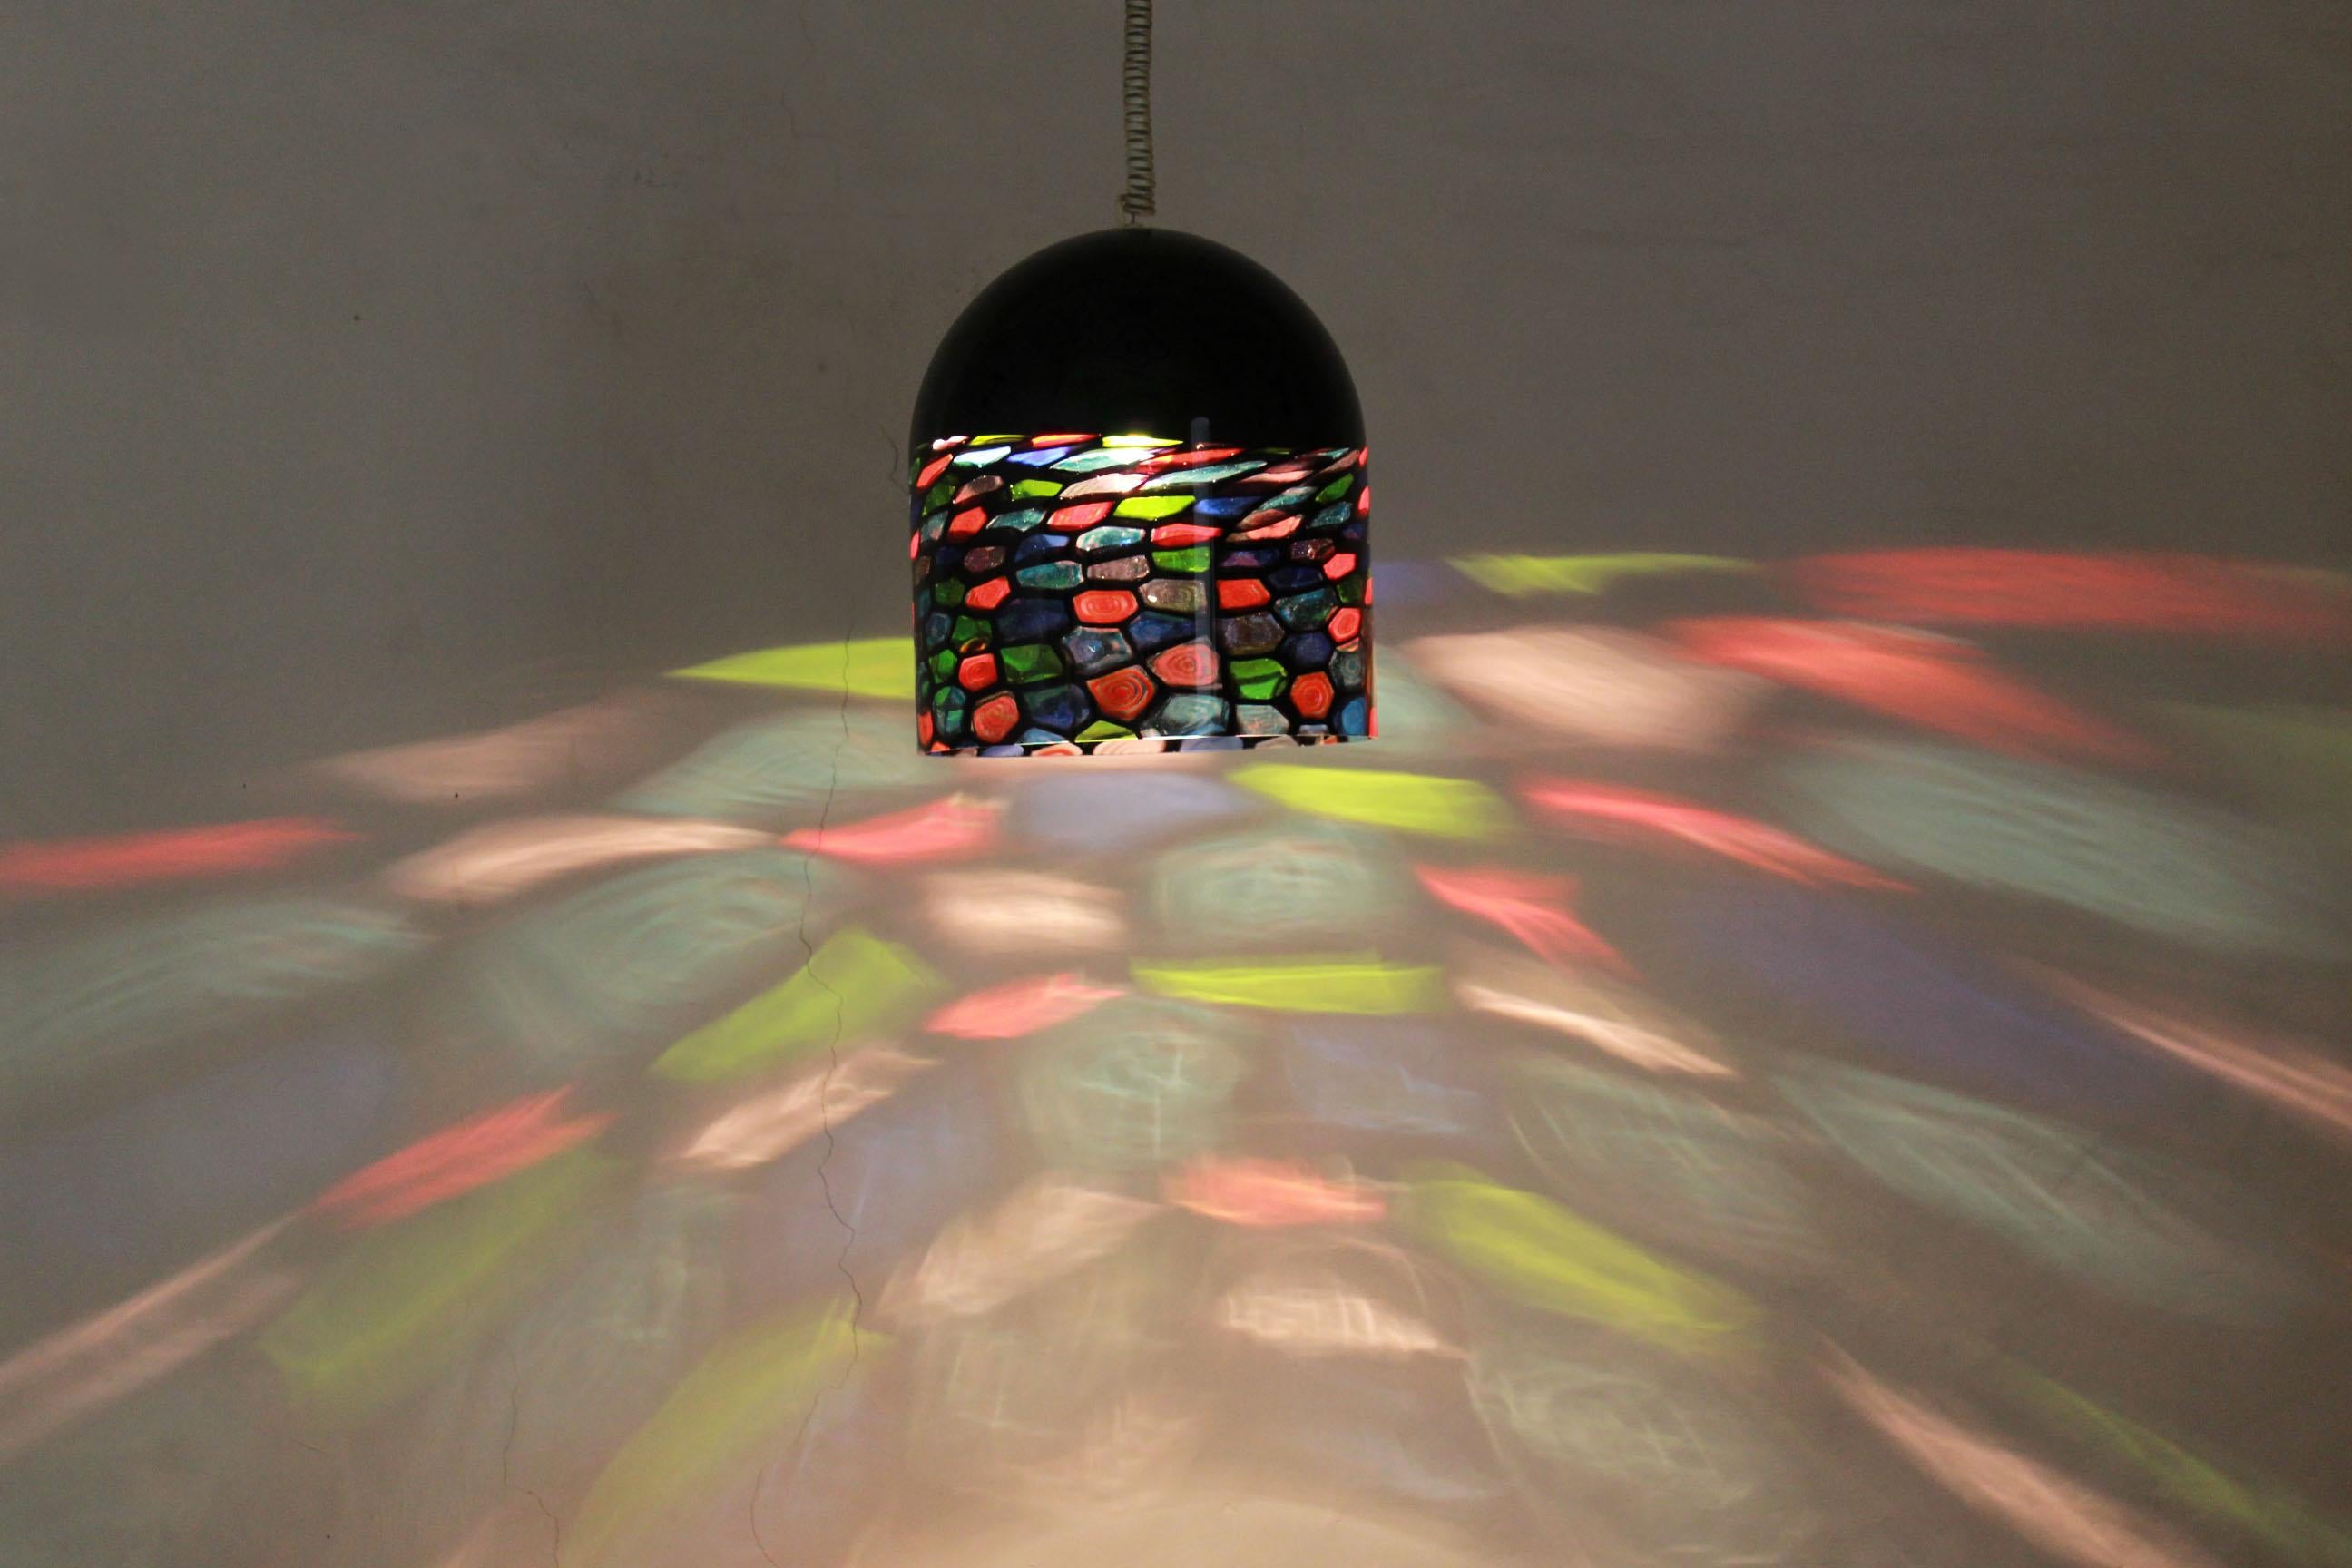 Multi-color Murano glass vintage pendant from the 1970s. Designed by Noti Massari for Leucos. The lamp is suspended from its ceiling cap by a single steel cable, surrounded by a coiled electrical cable (which is adjustable for hanging). In excellent